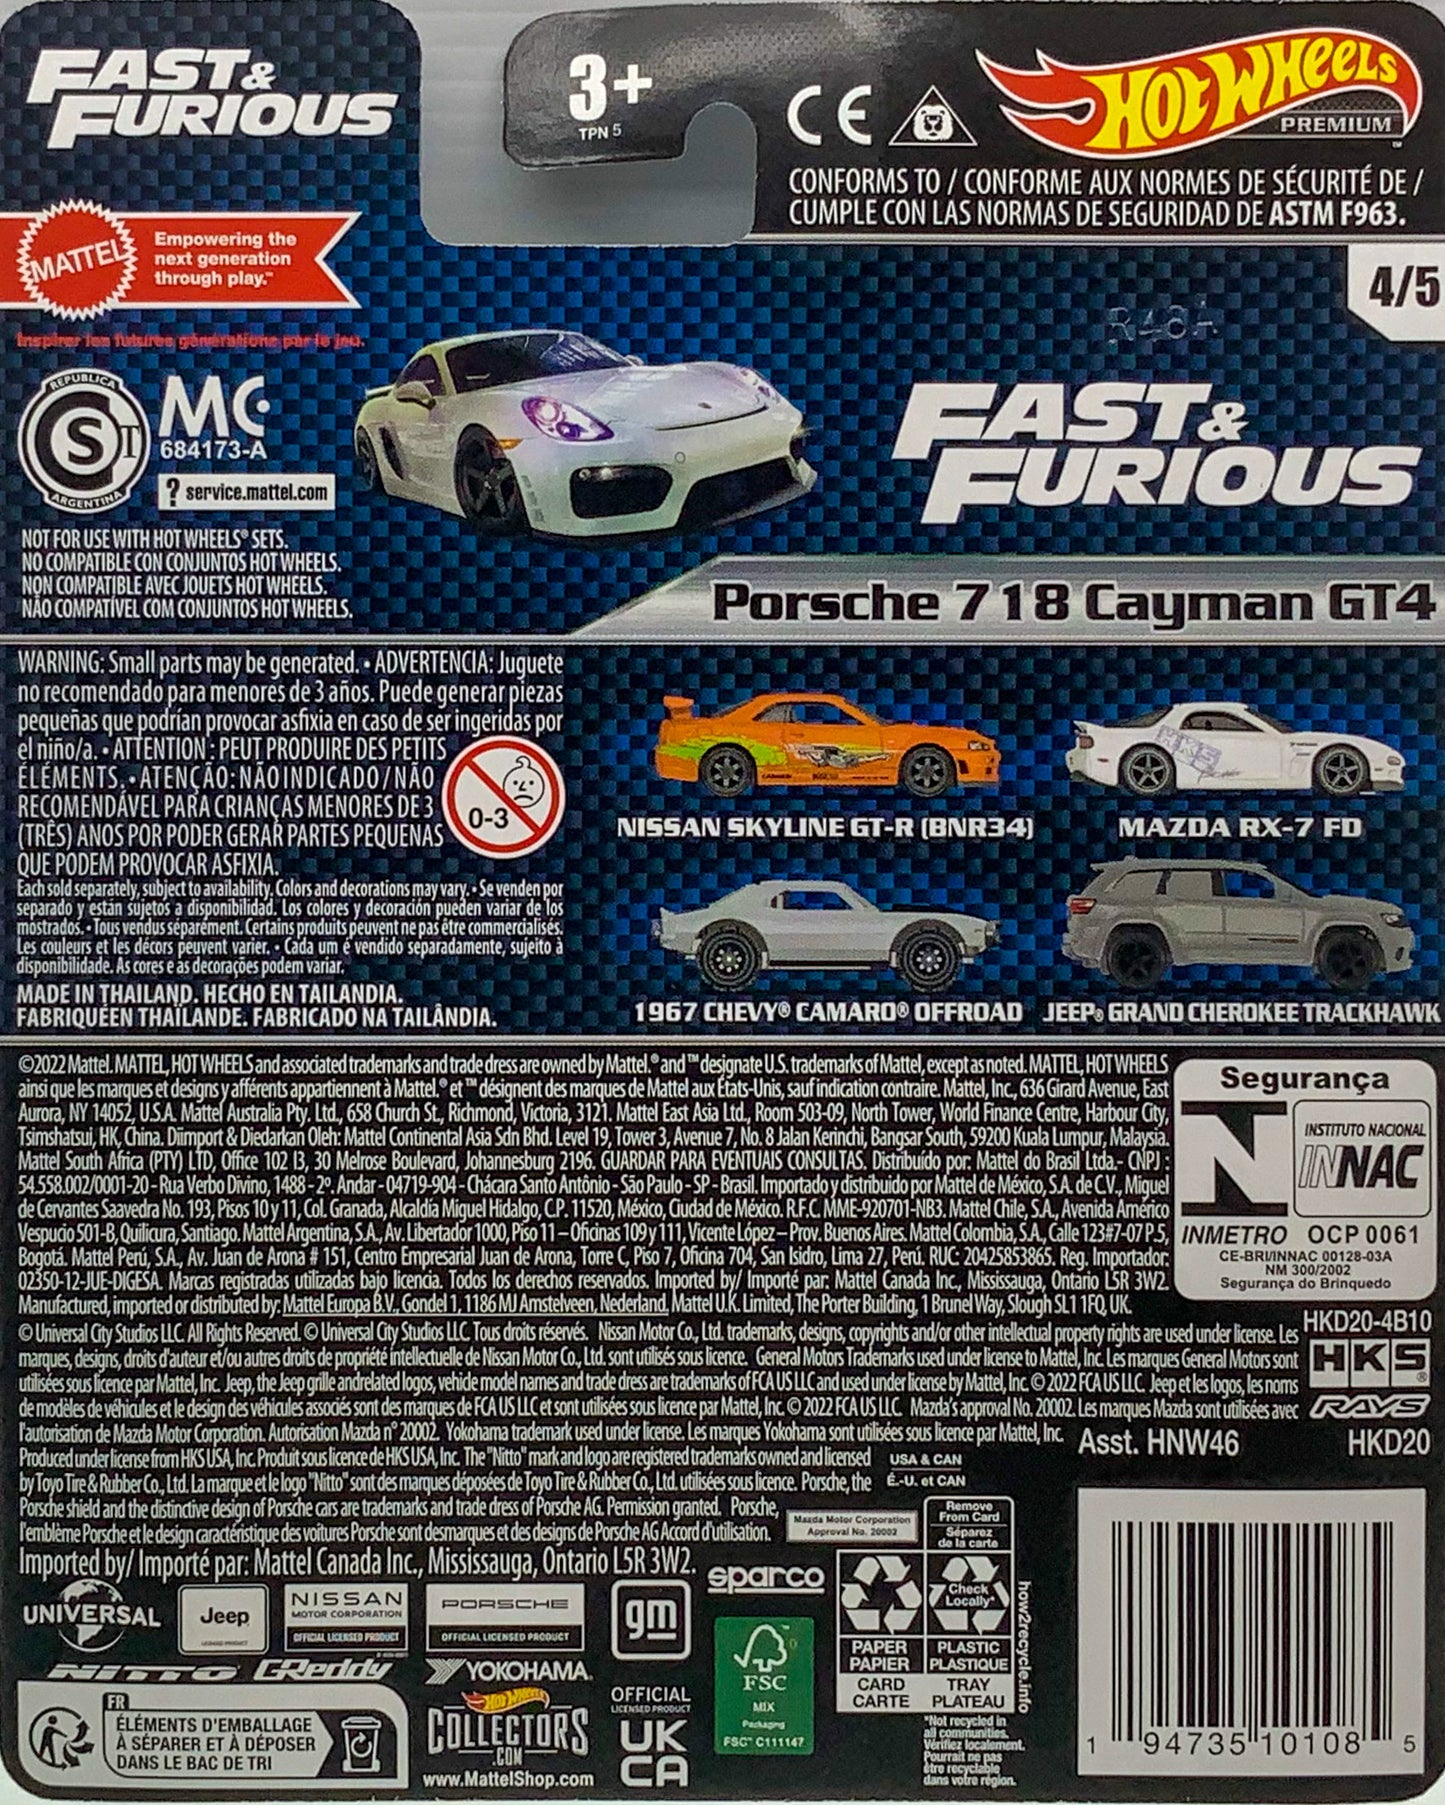 Buy at Tatoyshop.com Products Direct from Shipper Manufacturer Box Made in Thailand Hot Wheels Cars Toys Mattel SKU: HNW46-956A BAR CODE: 00194735151295   Buy at www.tatoyshop.com Back of the Card shows the 5 Cars on the Series  List 2023 Hot Wheels Premium Fast & Furious Series  '95 Mazda RX-7 FD 1/5 '67 Off-Road Chevy Camaro 2/5 Jeep Grand Cherokee – Trackhawk 3/5 Porsche 718 Cayman GT4 4/5 Nissan Skyline GT-R (BNR34) 5/5 